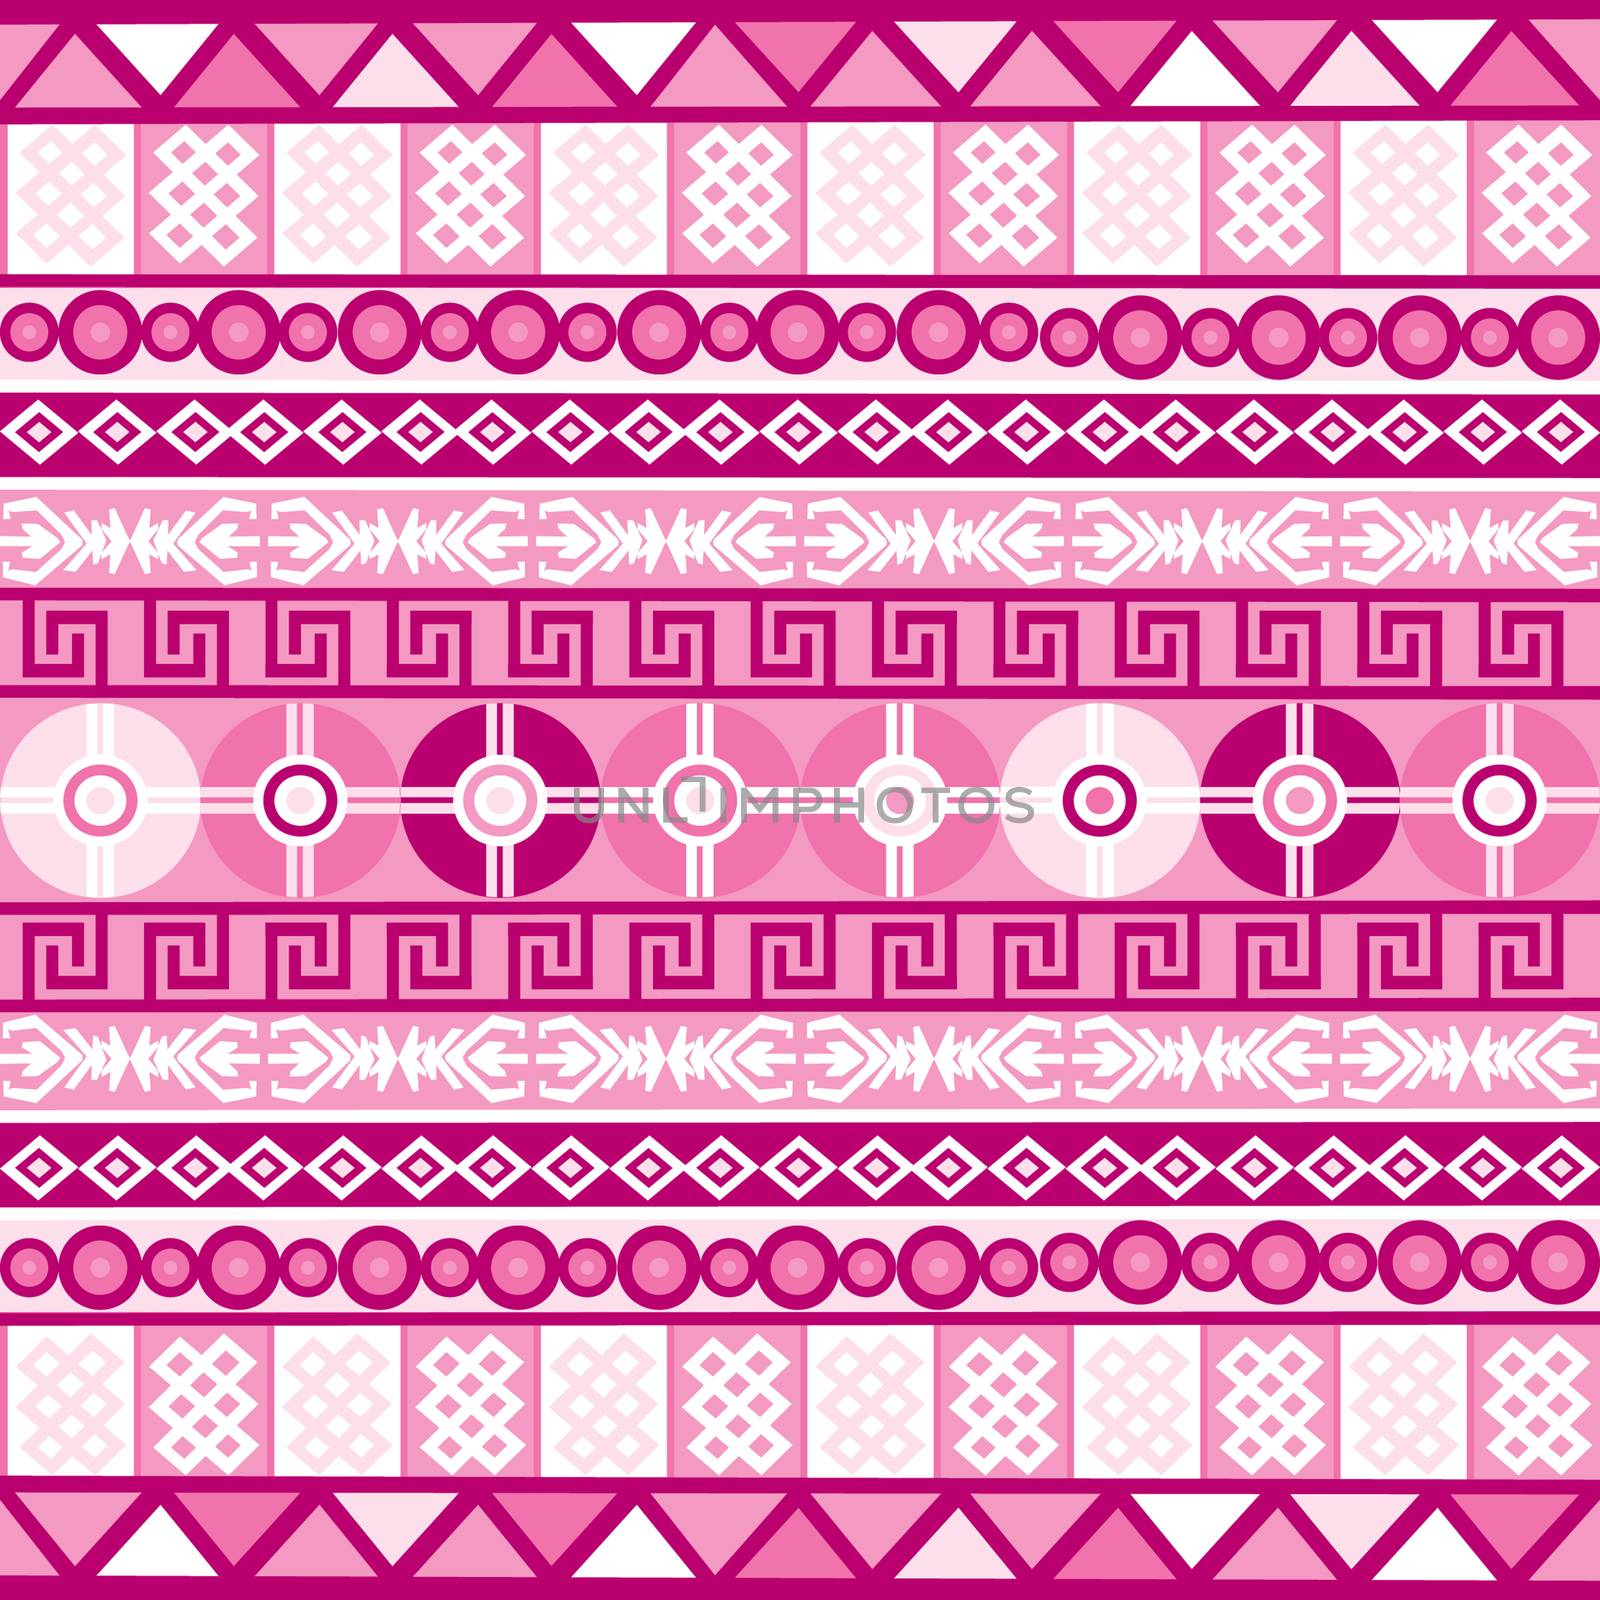 Pink background with ethnic tribal motifs by hibrida13